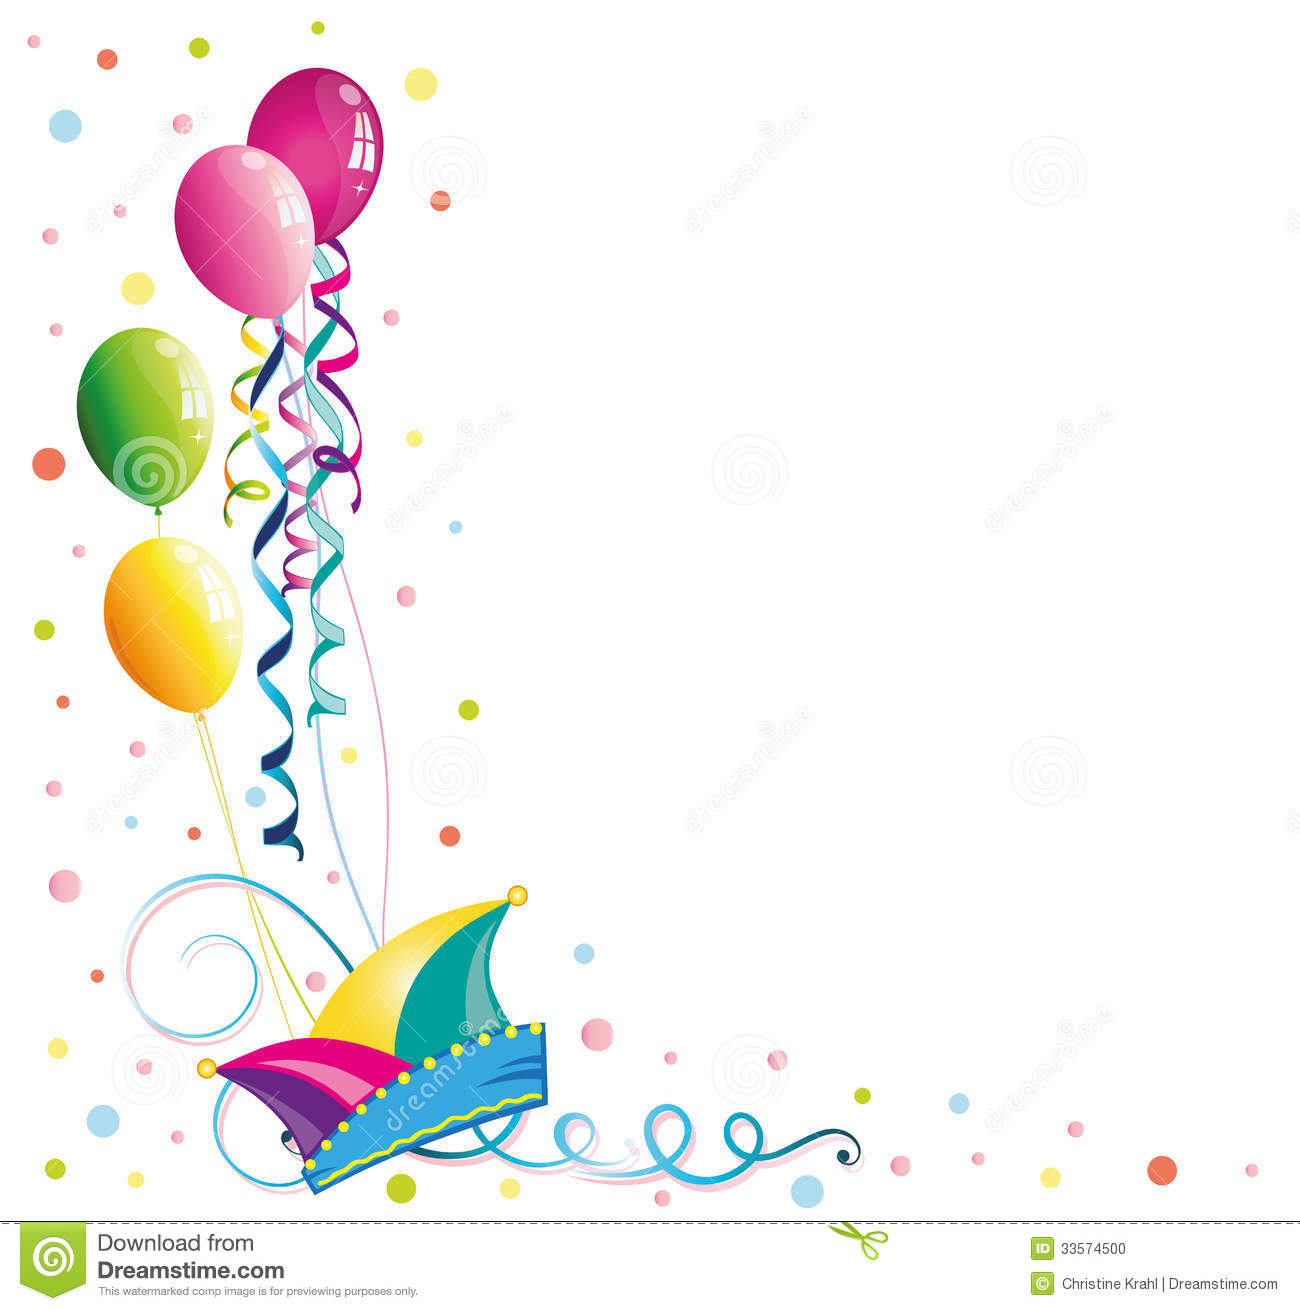 Colorful Carnival Border With Balloons Streamers And Confetti